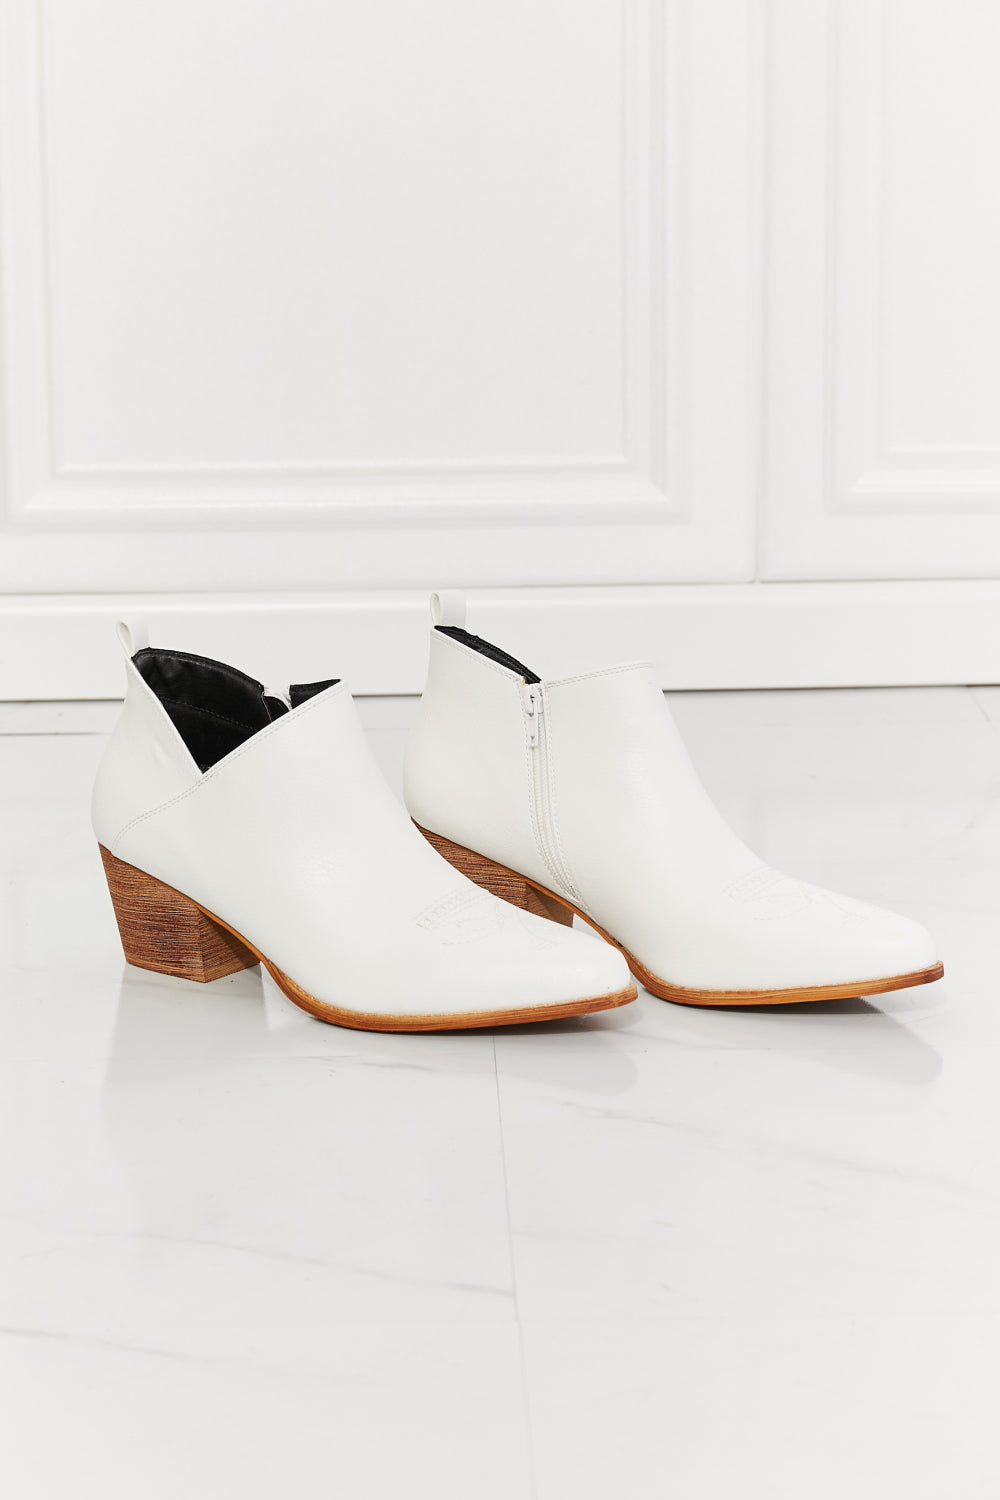 MMShoes Trust Yourself Embroidered Crossover Cowboy Bootie in White - Tigbul's Fashion